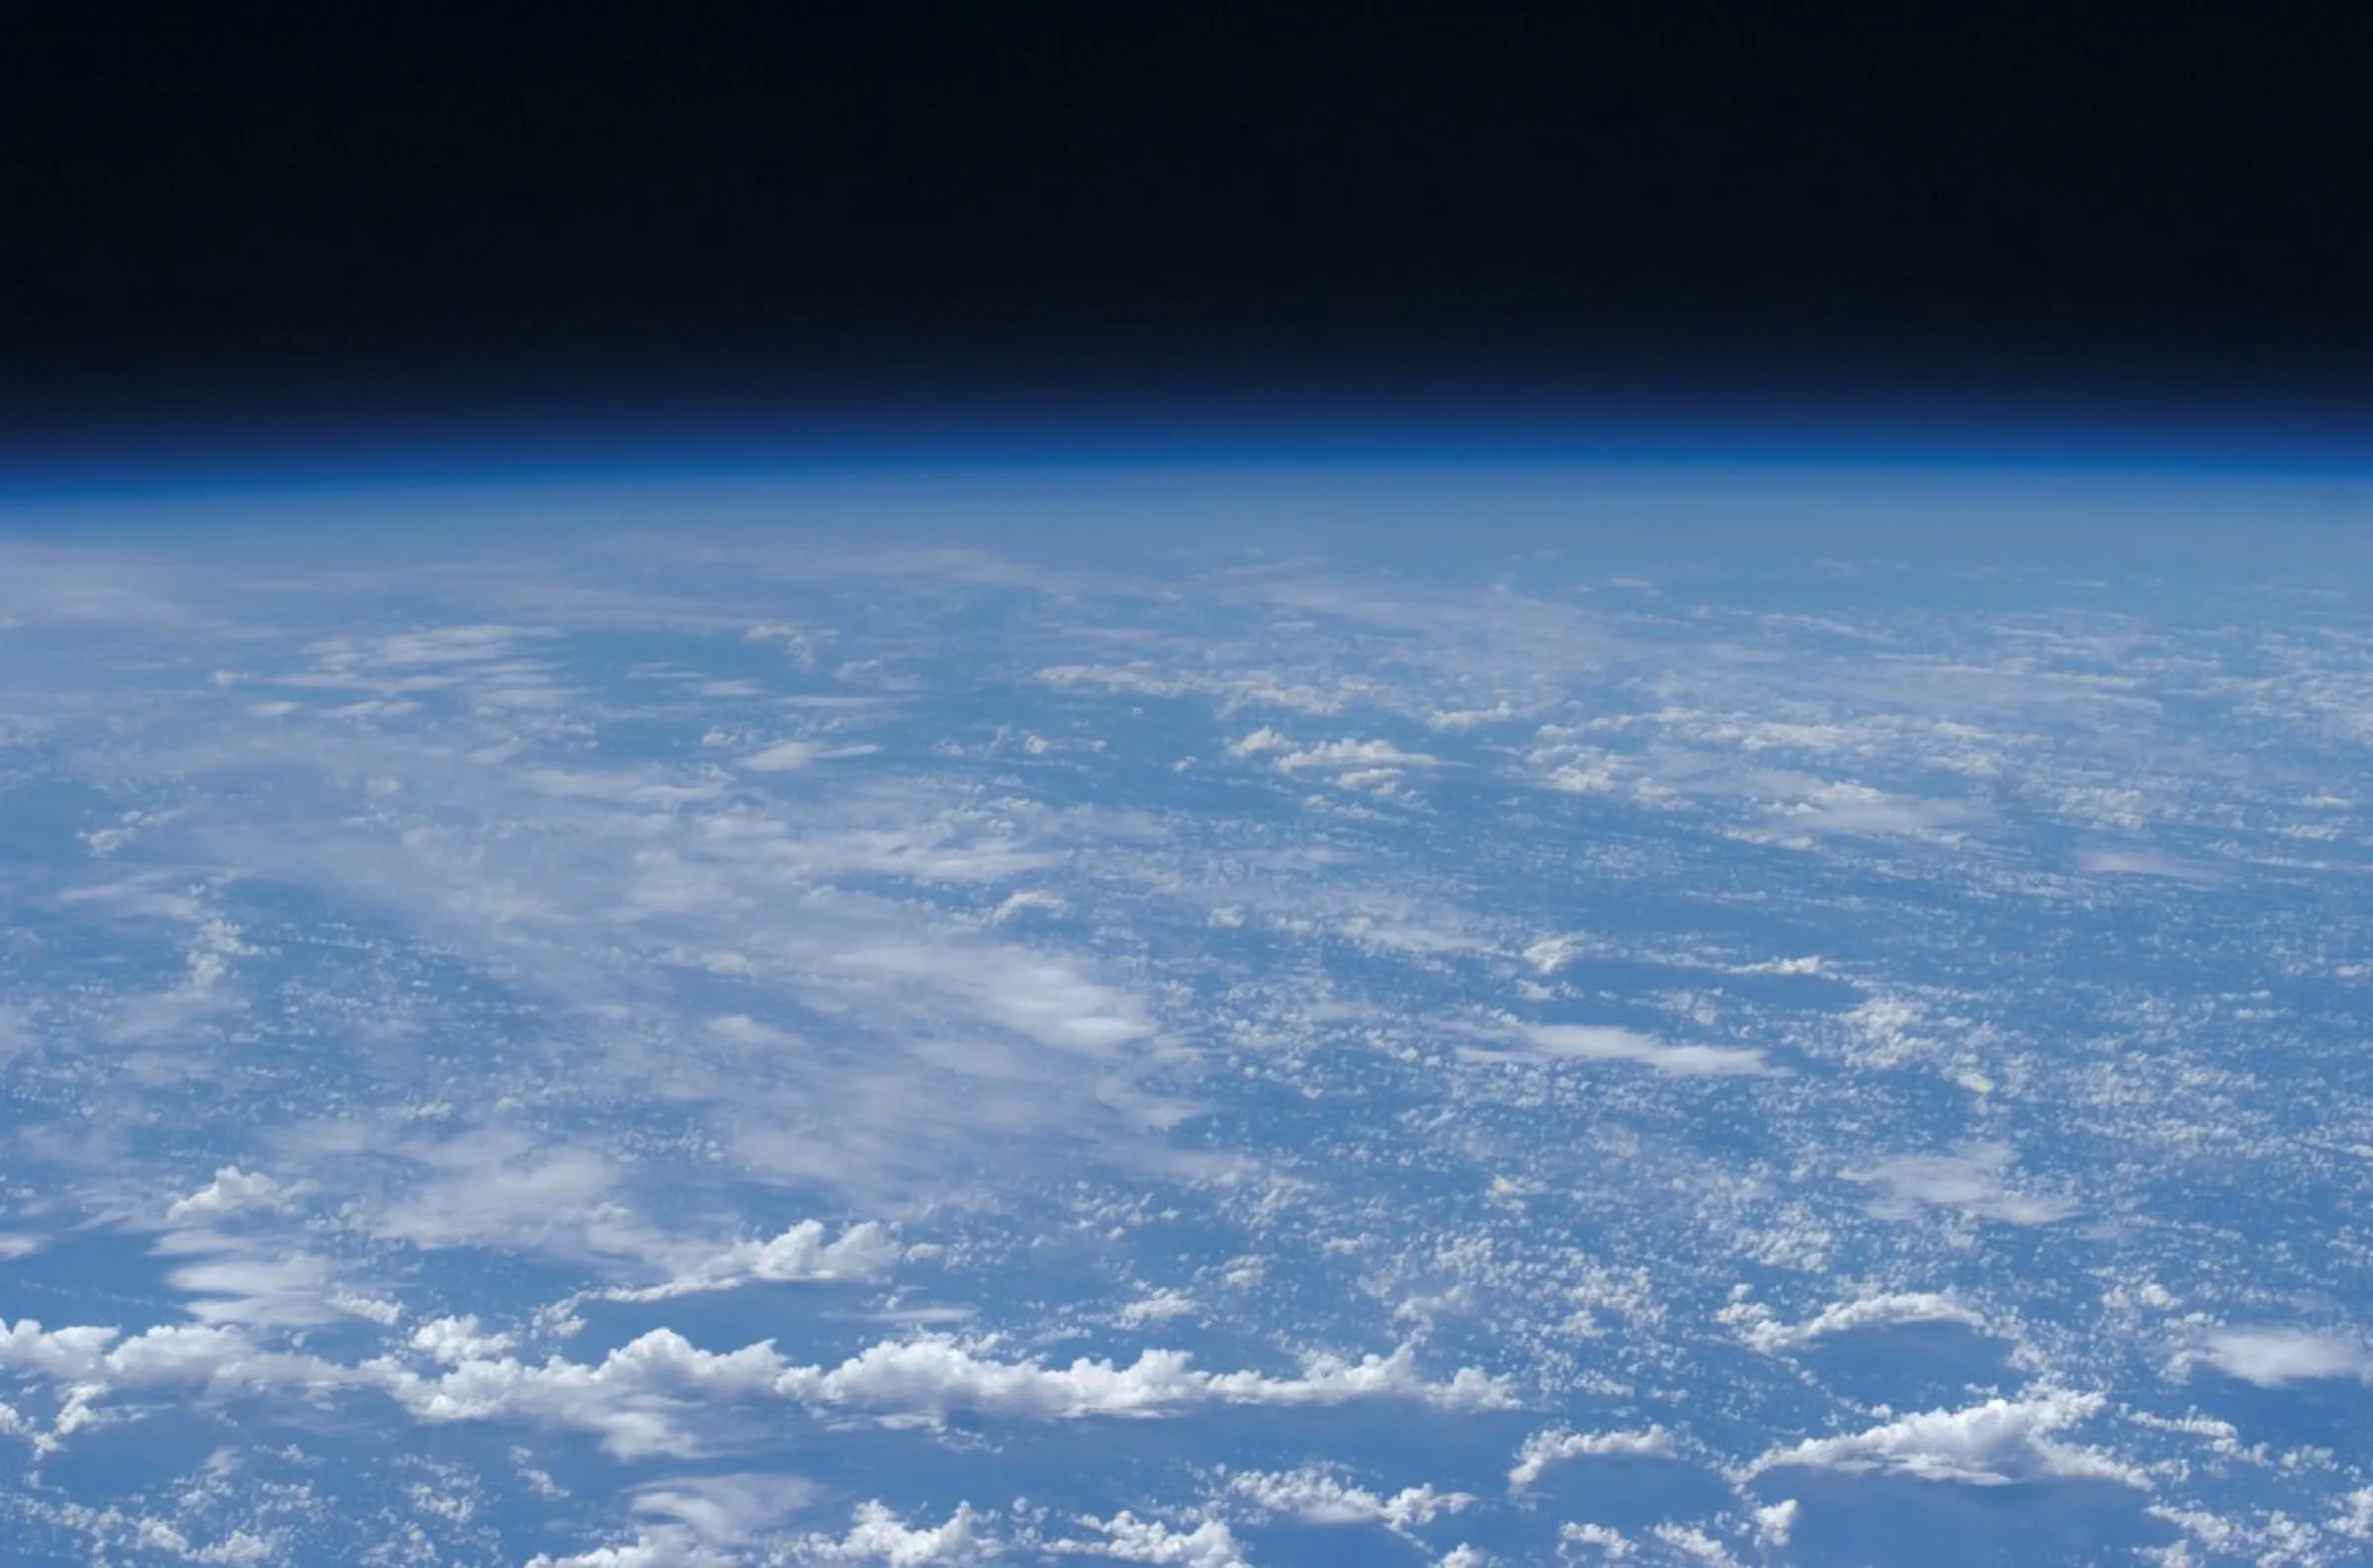 This is an oblique horizon view taken from the International Space Station at 220 miles above Earth clearly showing the planet's atmosphere in this NASA handout photo taken July 22, 2009. NASA/Handout via Reuters